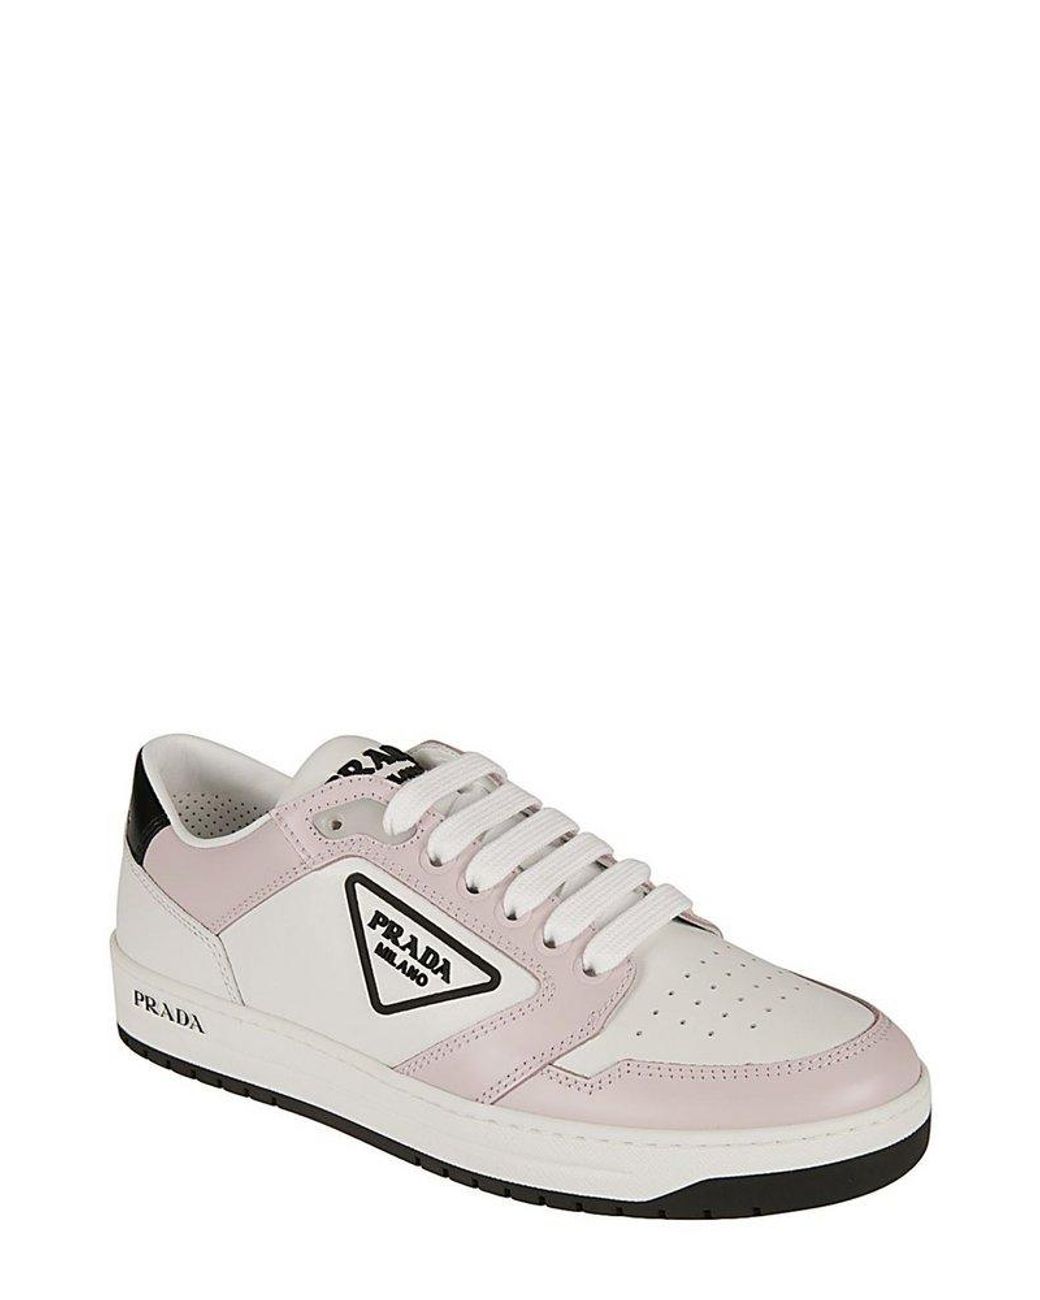 Prada Action Lace-up Sneakers in White | Lyst